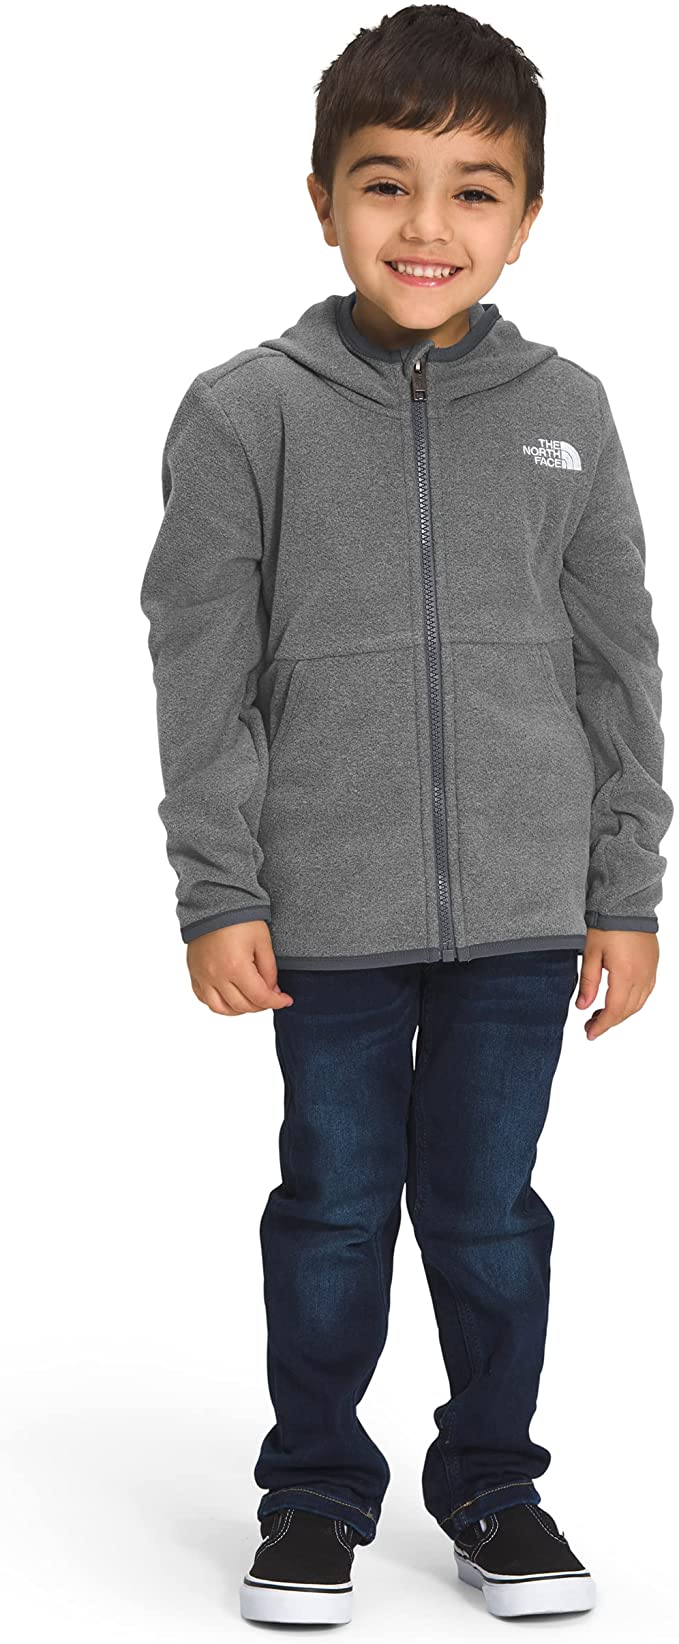 The North Face Boys' or Girls' Toddlers’ Glacier Full Zip Hoodie (Tnf Medium Grey Heather, Sizes 2-4) $23 + Free Shipping w/ Prime or on $25+